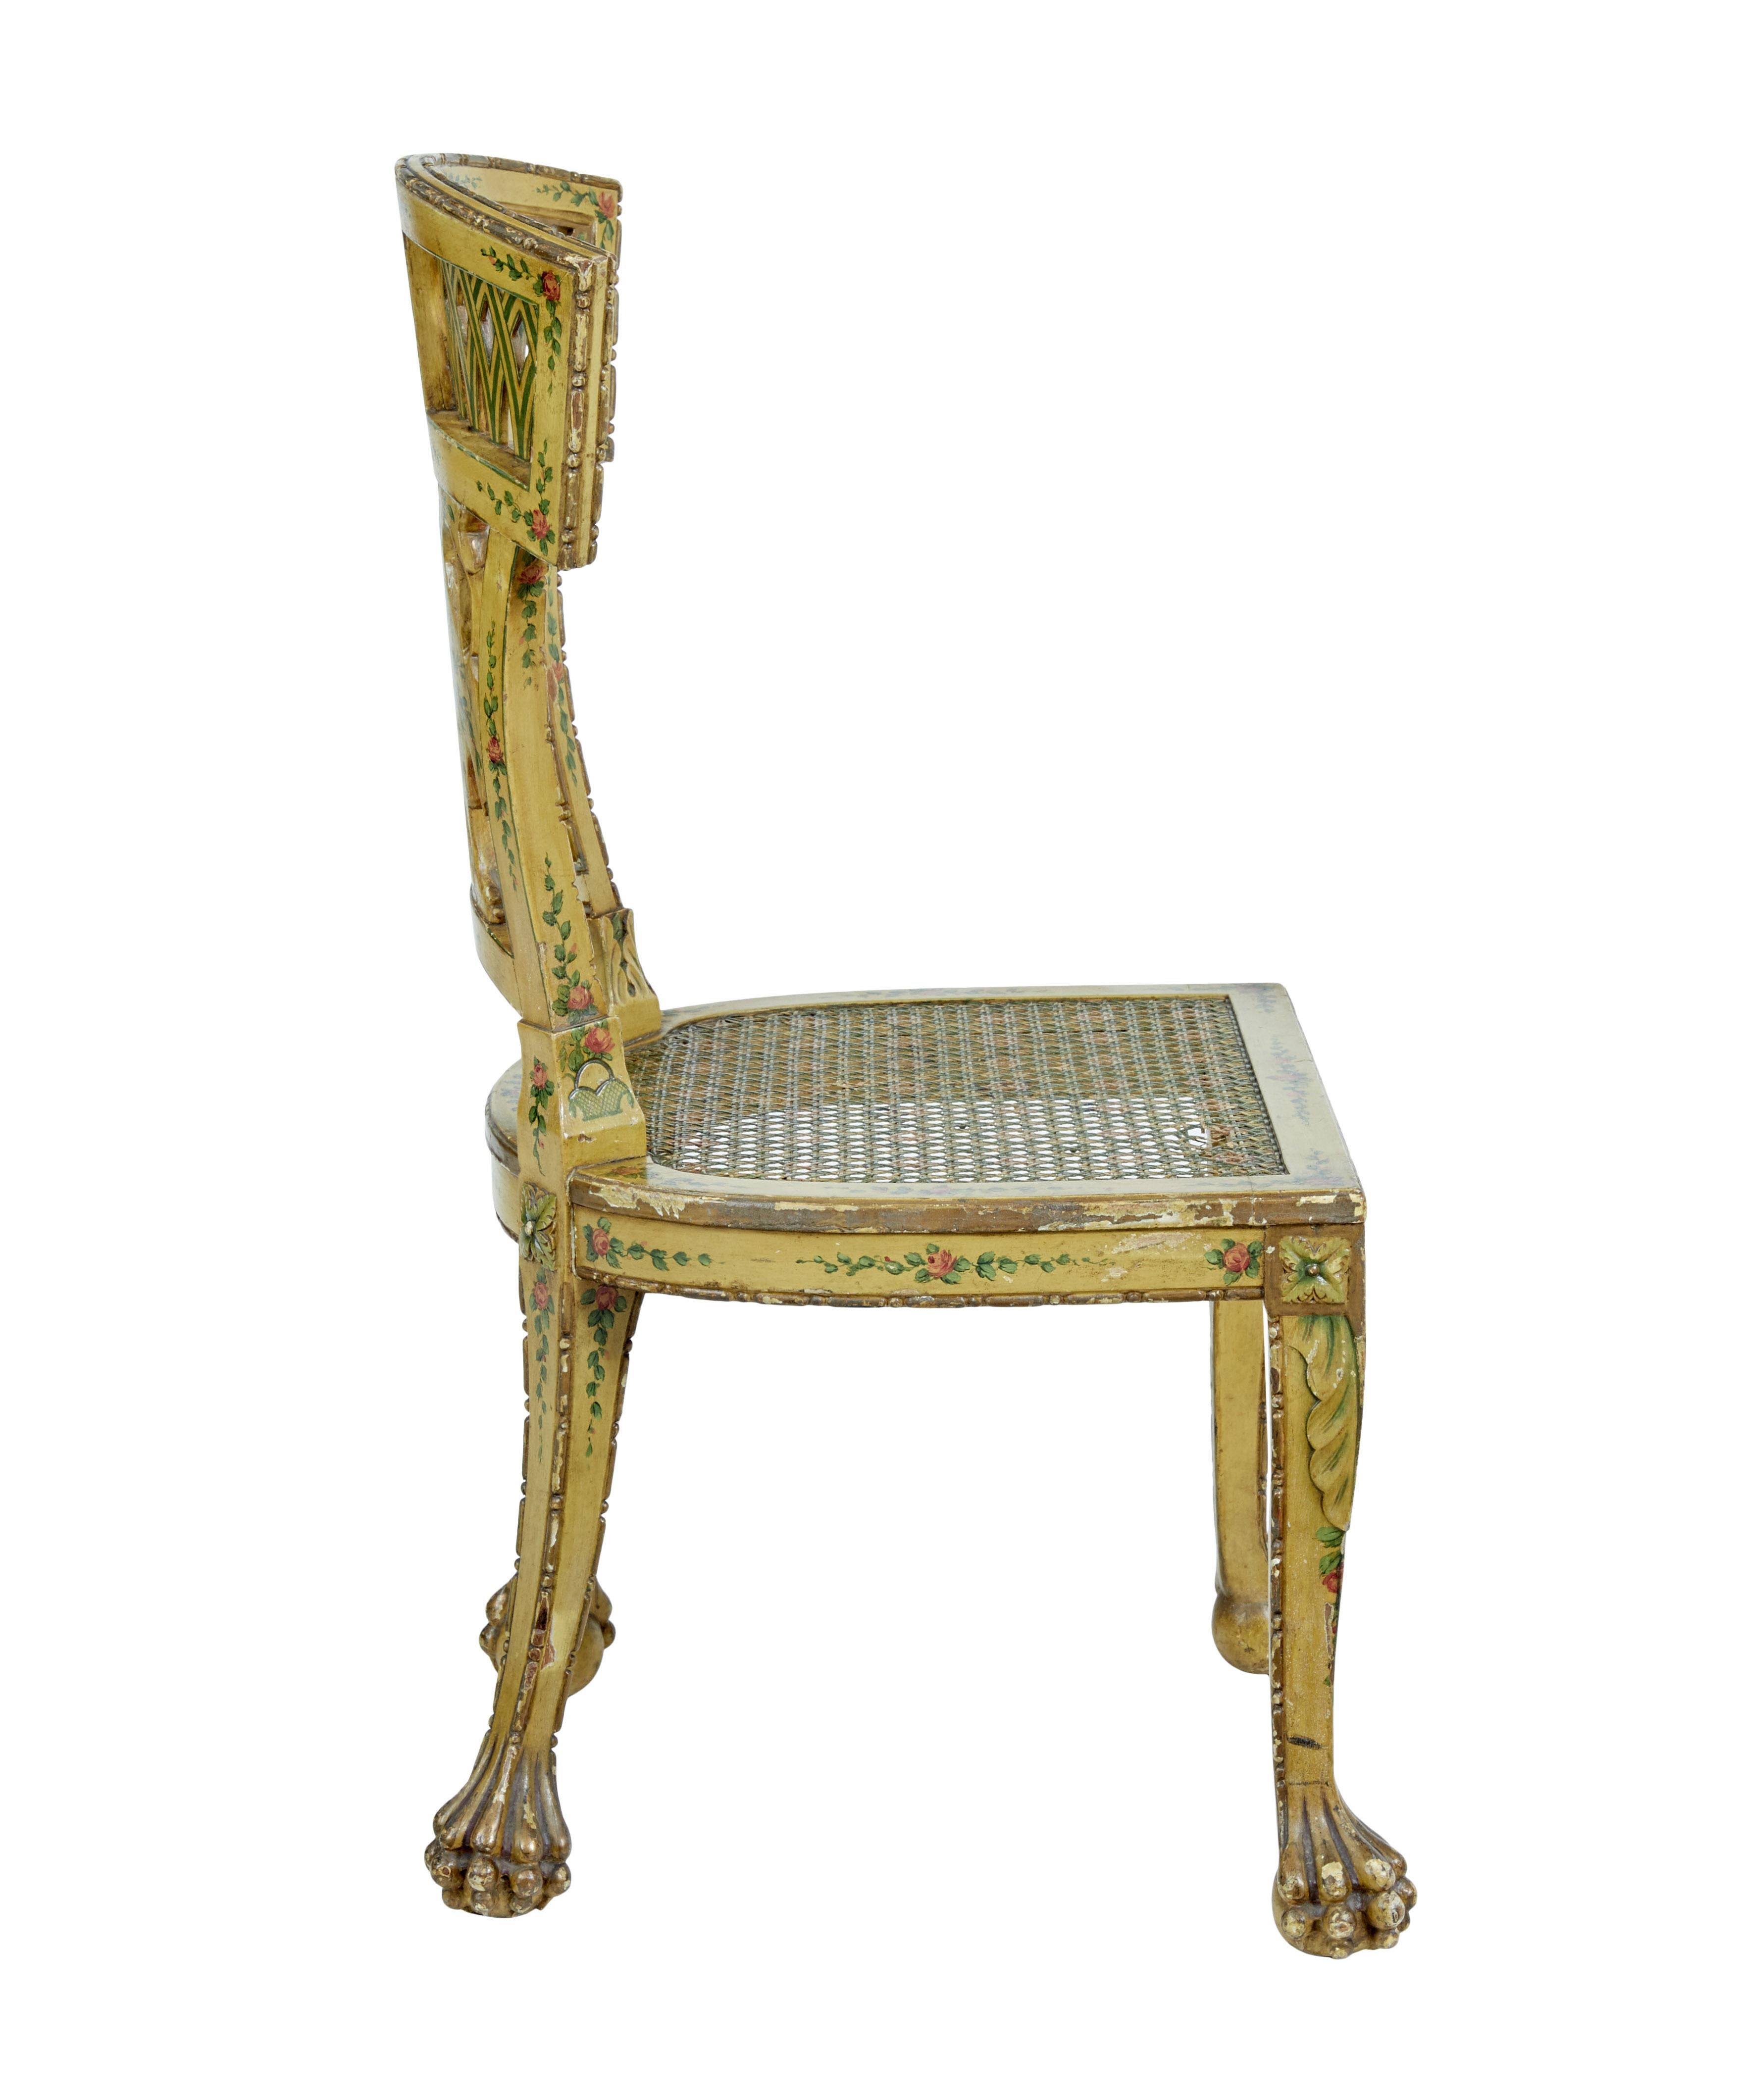 Austrian 19th Century Biedermeier Carved and Painted Cane Chair